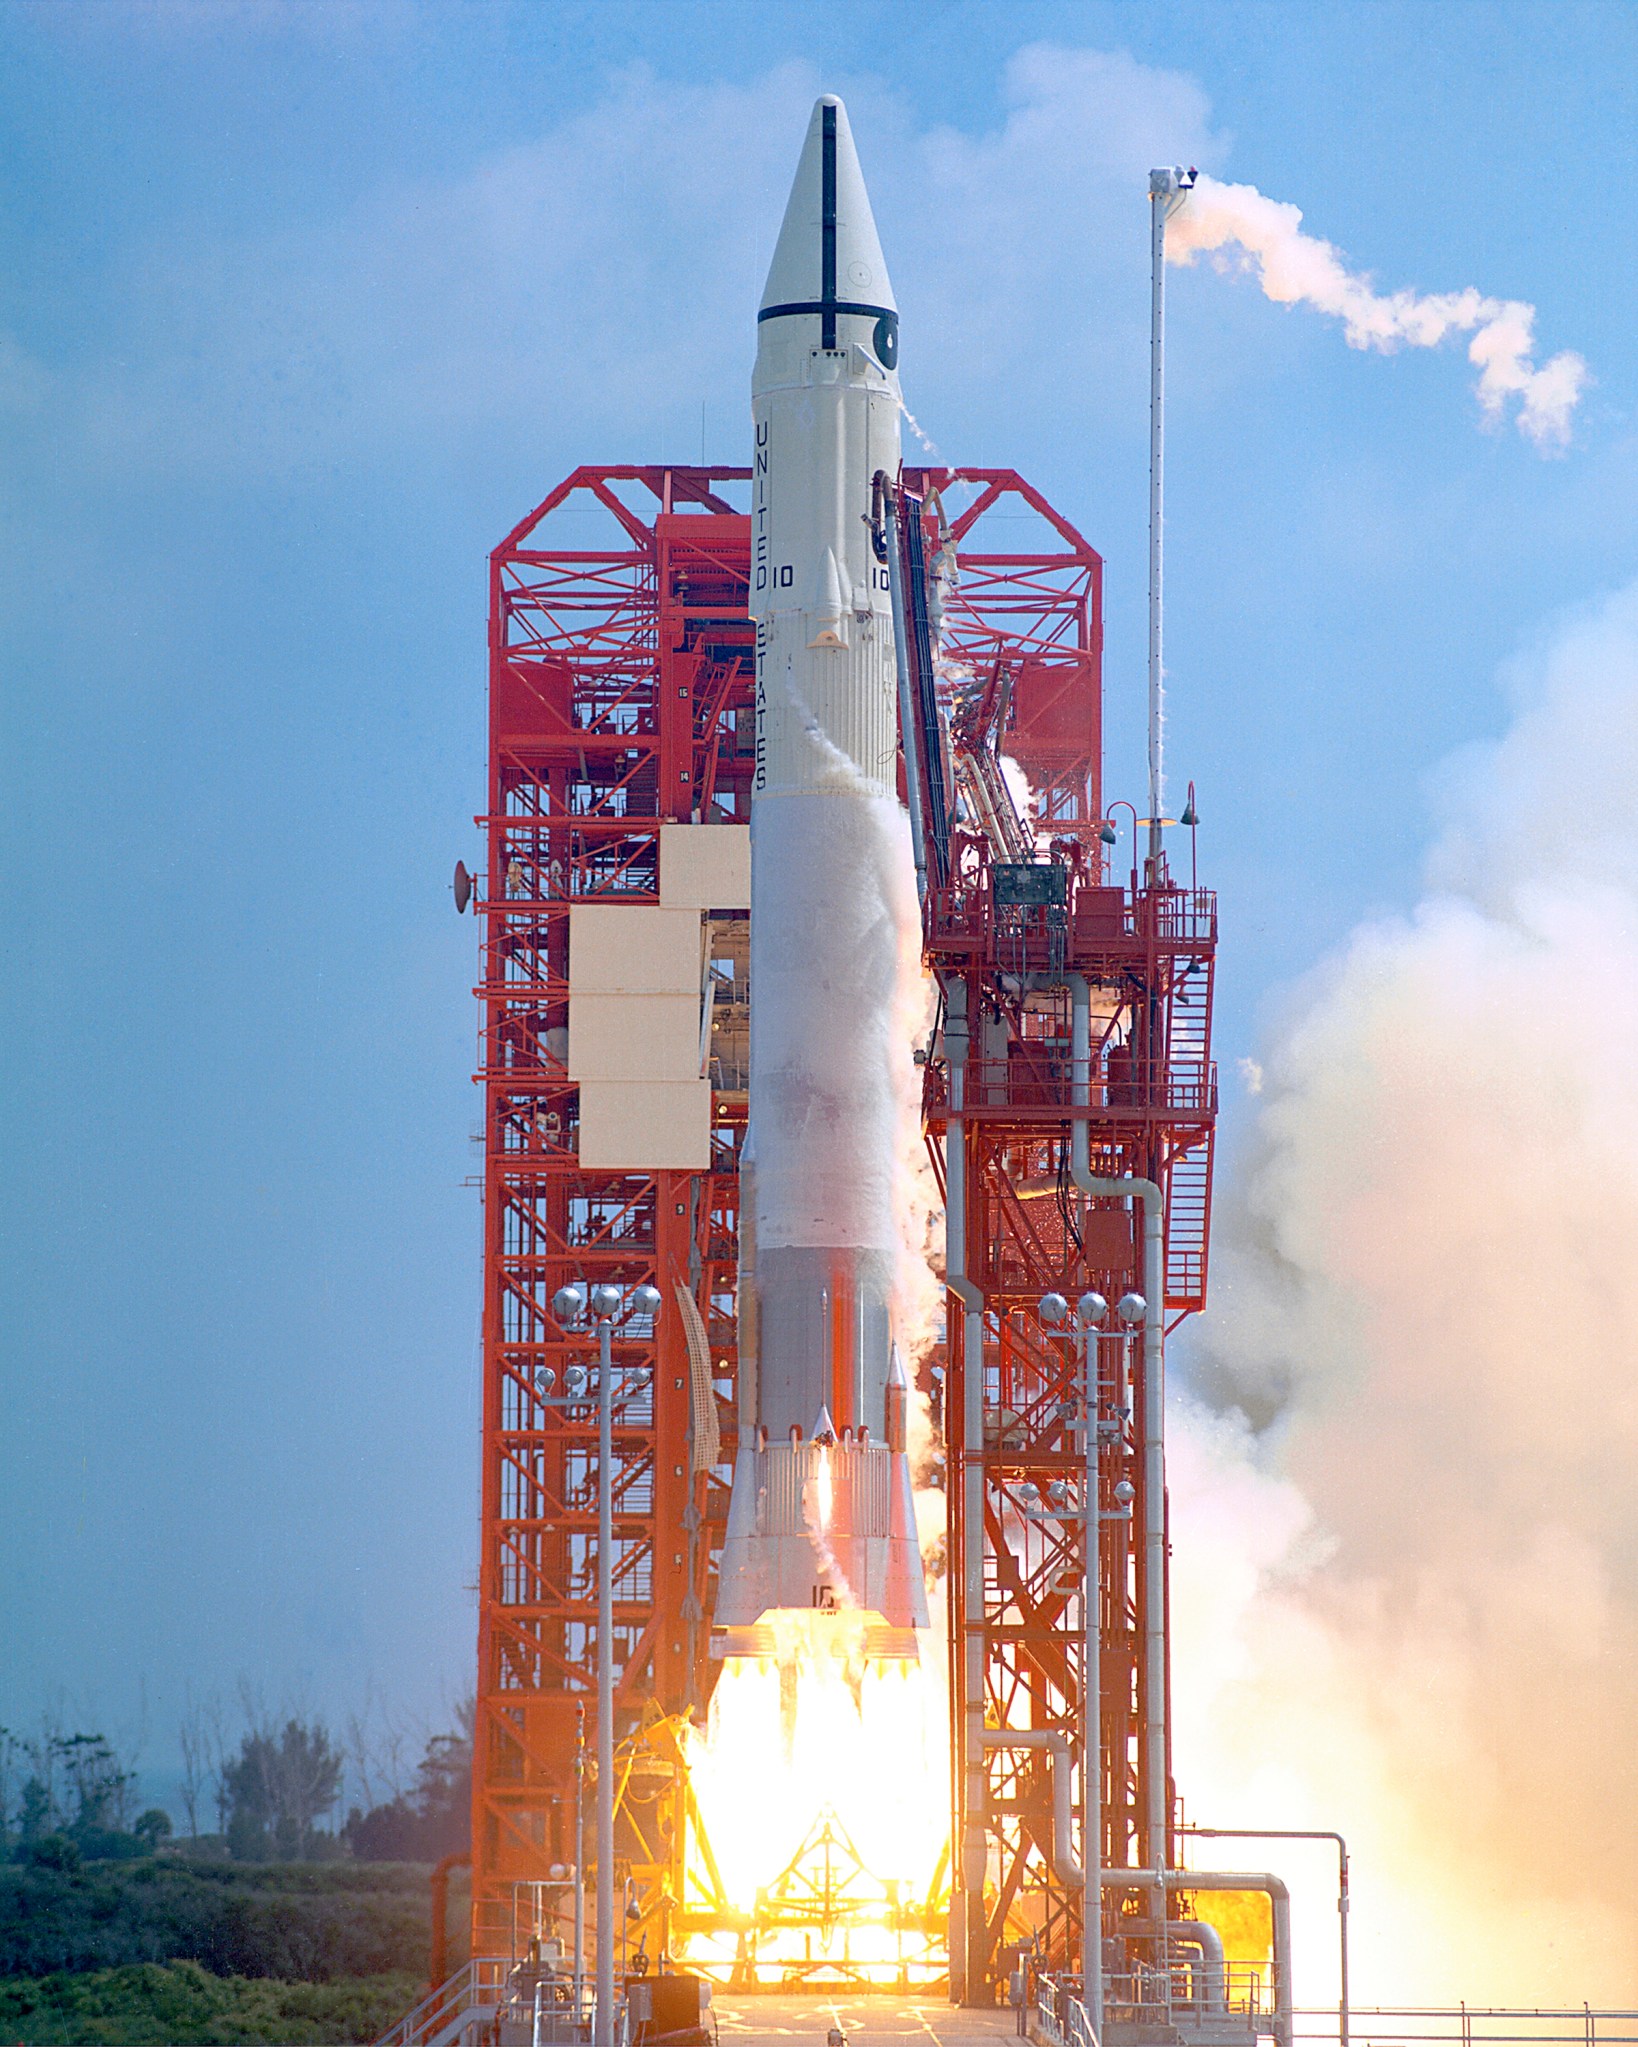 Rocket lifting off from launch tower.